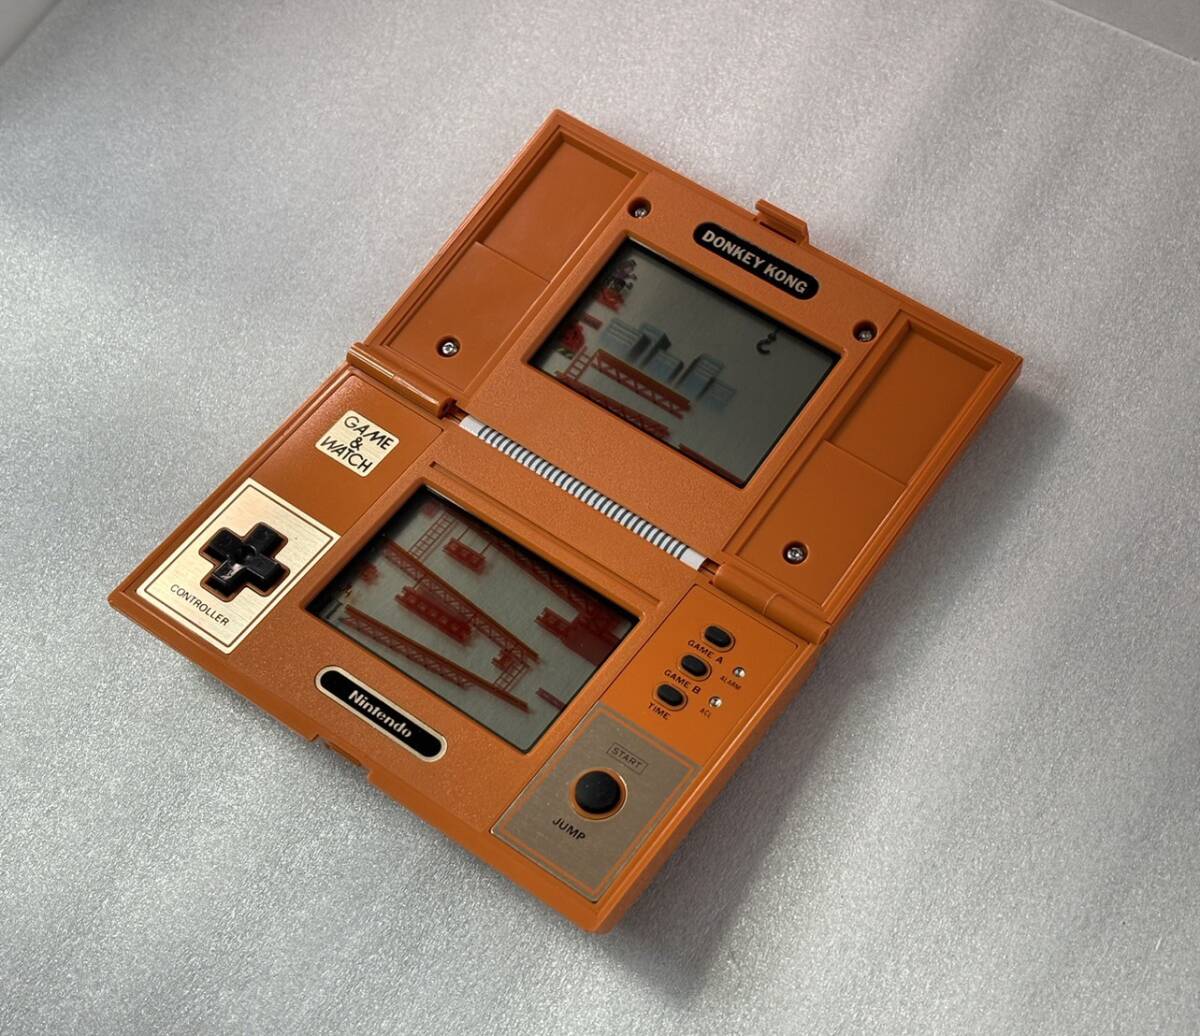  beautiful goods Game & Watch Donkey Kong screen excellent nintendo Nintendo prompt decision DONKEY KONG